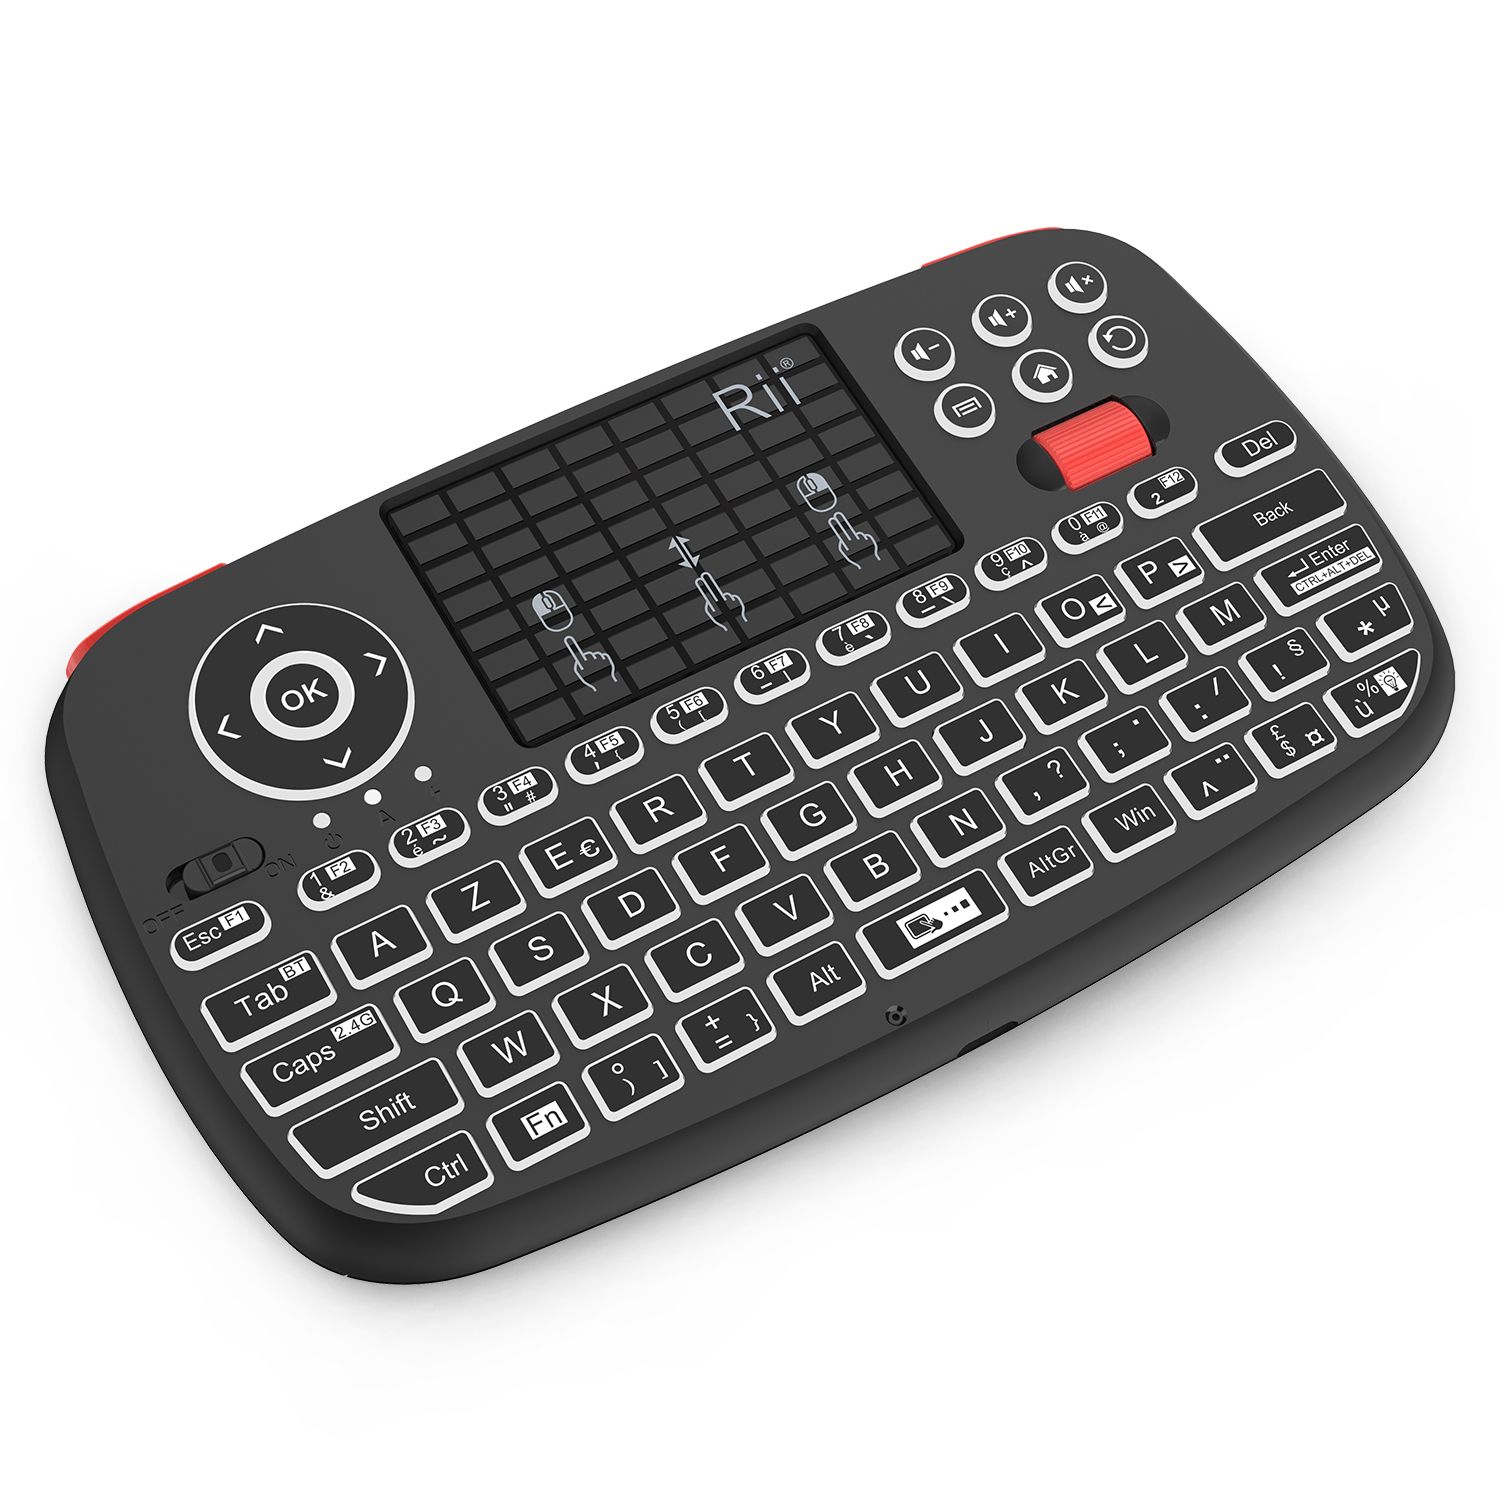 Rii-i4-French-Mini-Keyboard-24GHz-Bluetooth-Dual-Modes-Handheld-Fingerboard-Backlit-Mouse-Touchpad-f-1761126